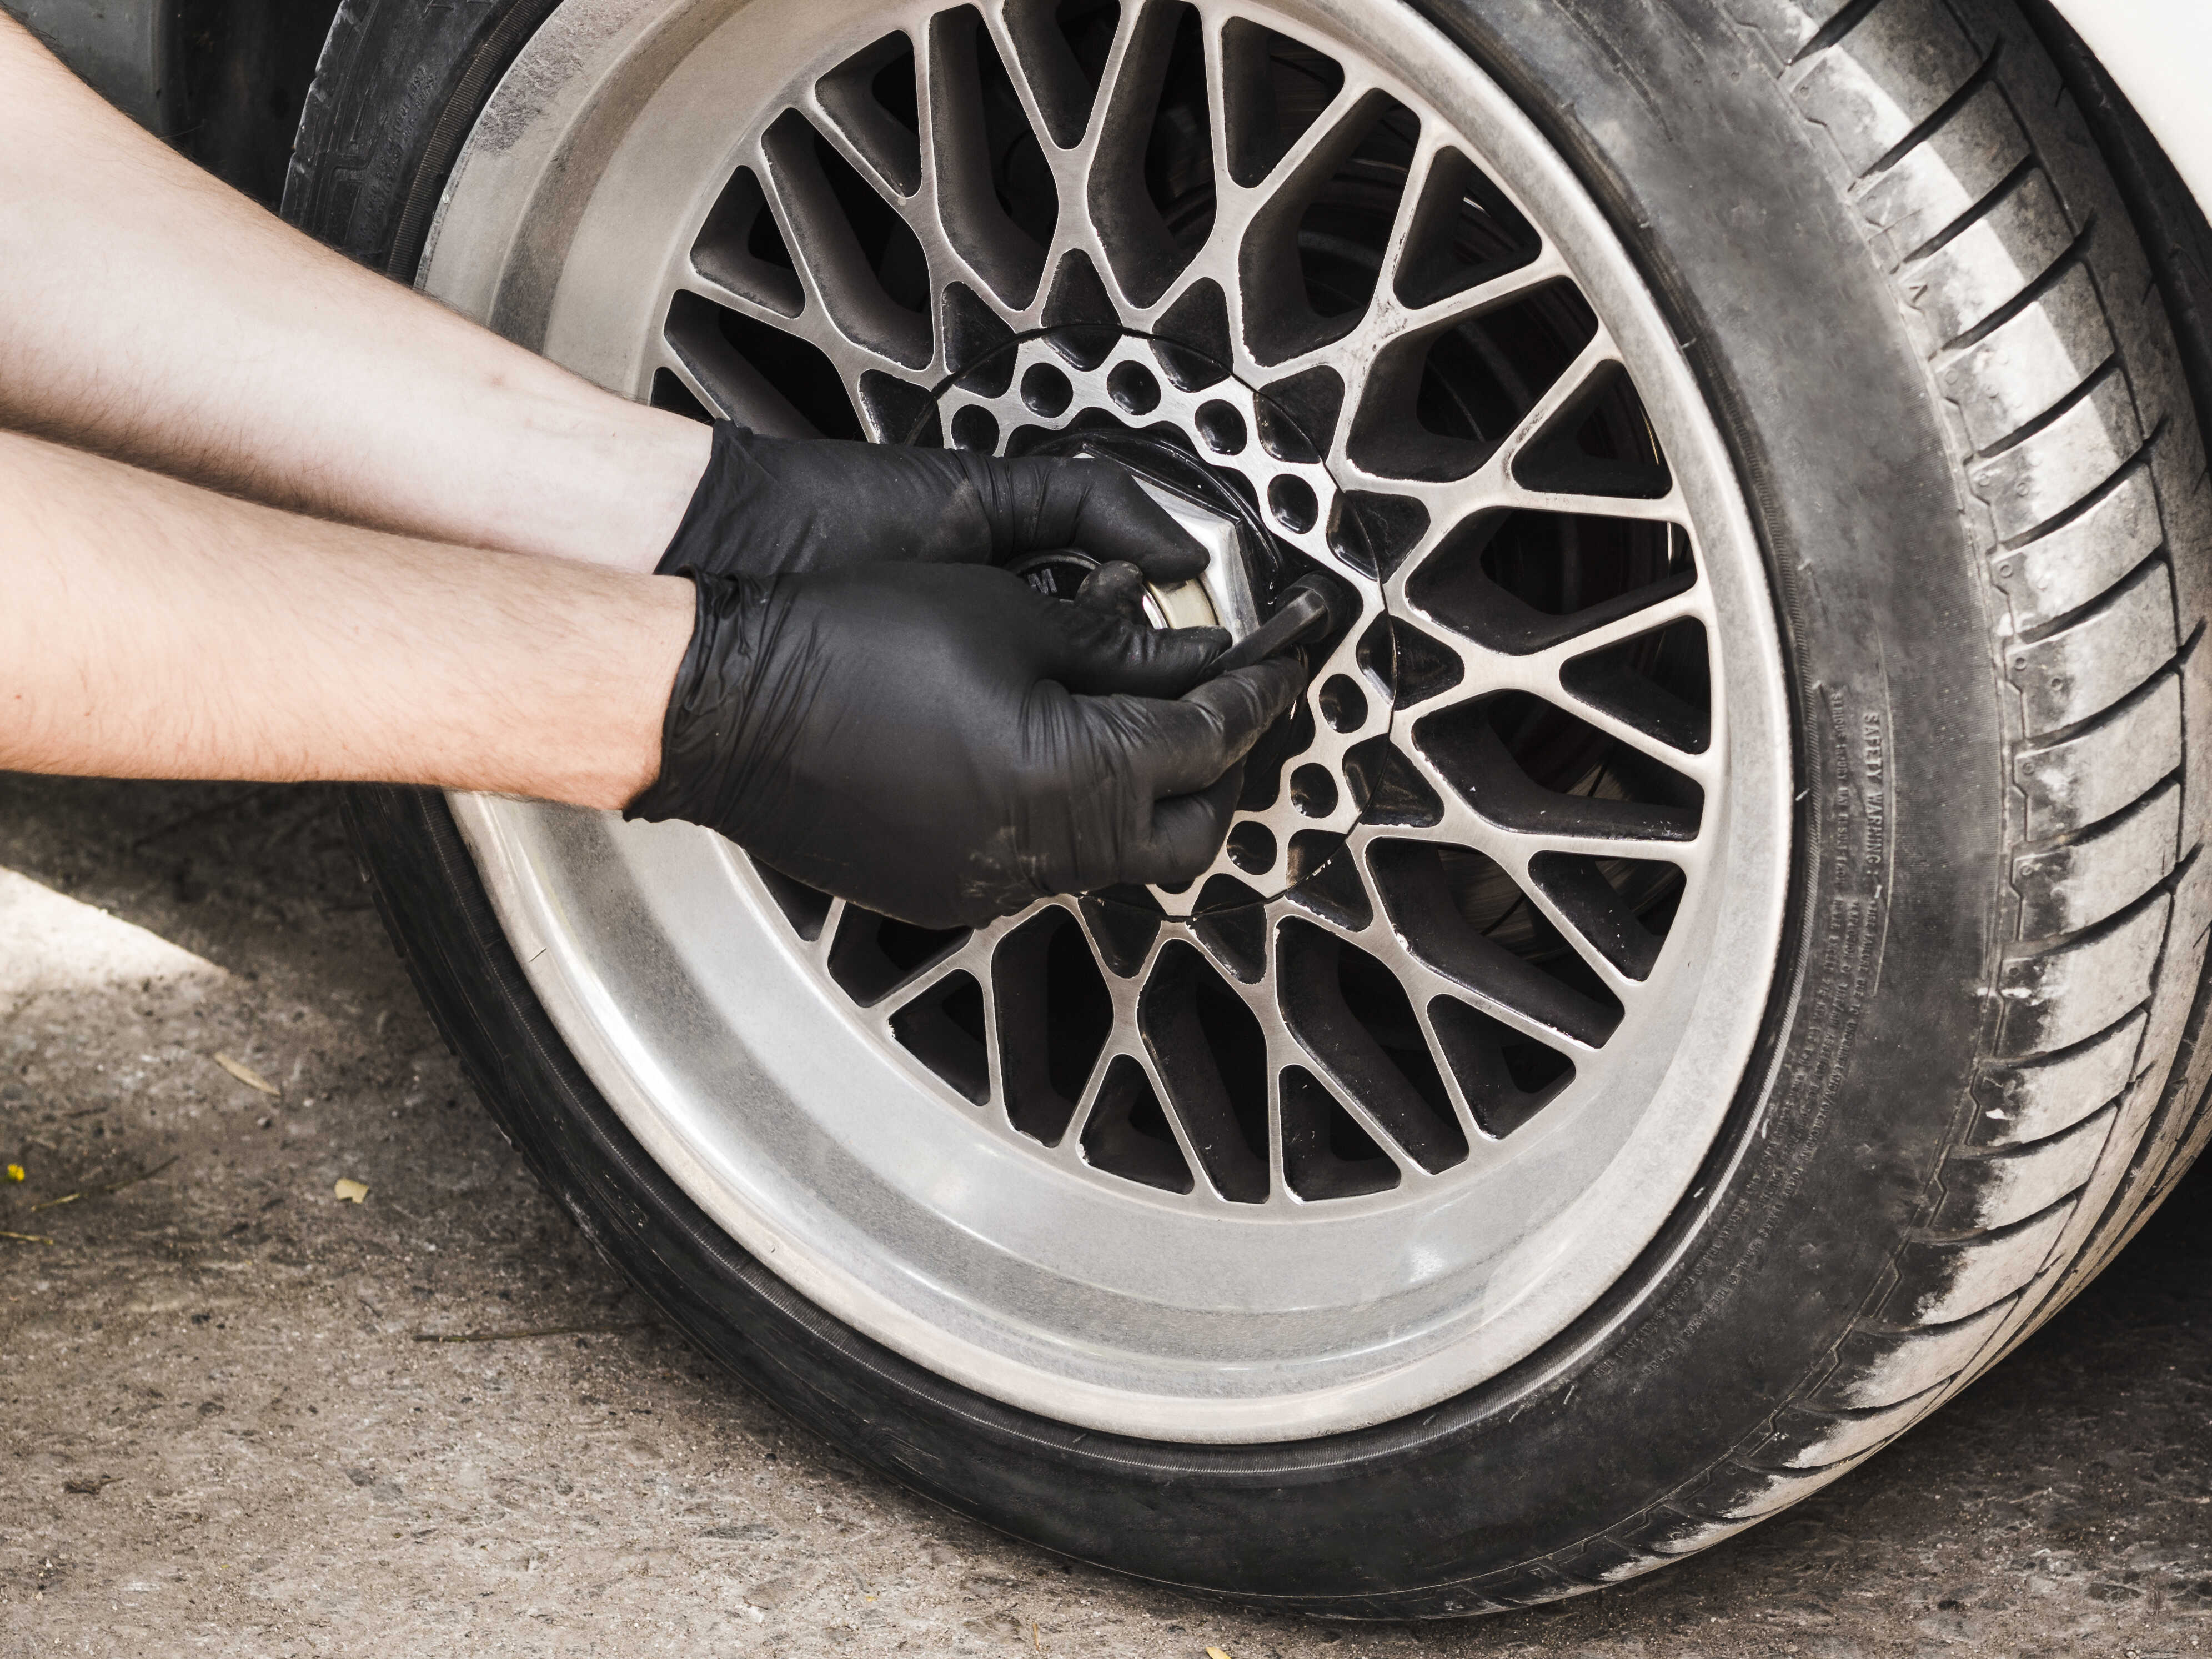 Mobile tire service in Austria - Flexible solutions on the road